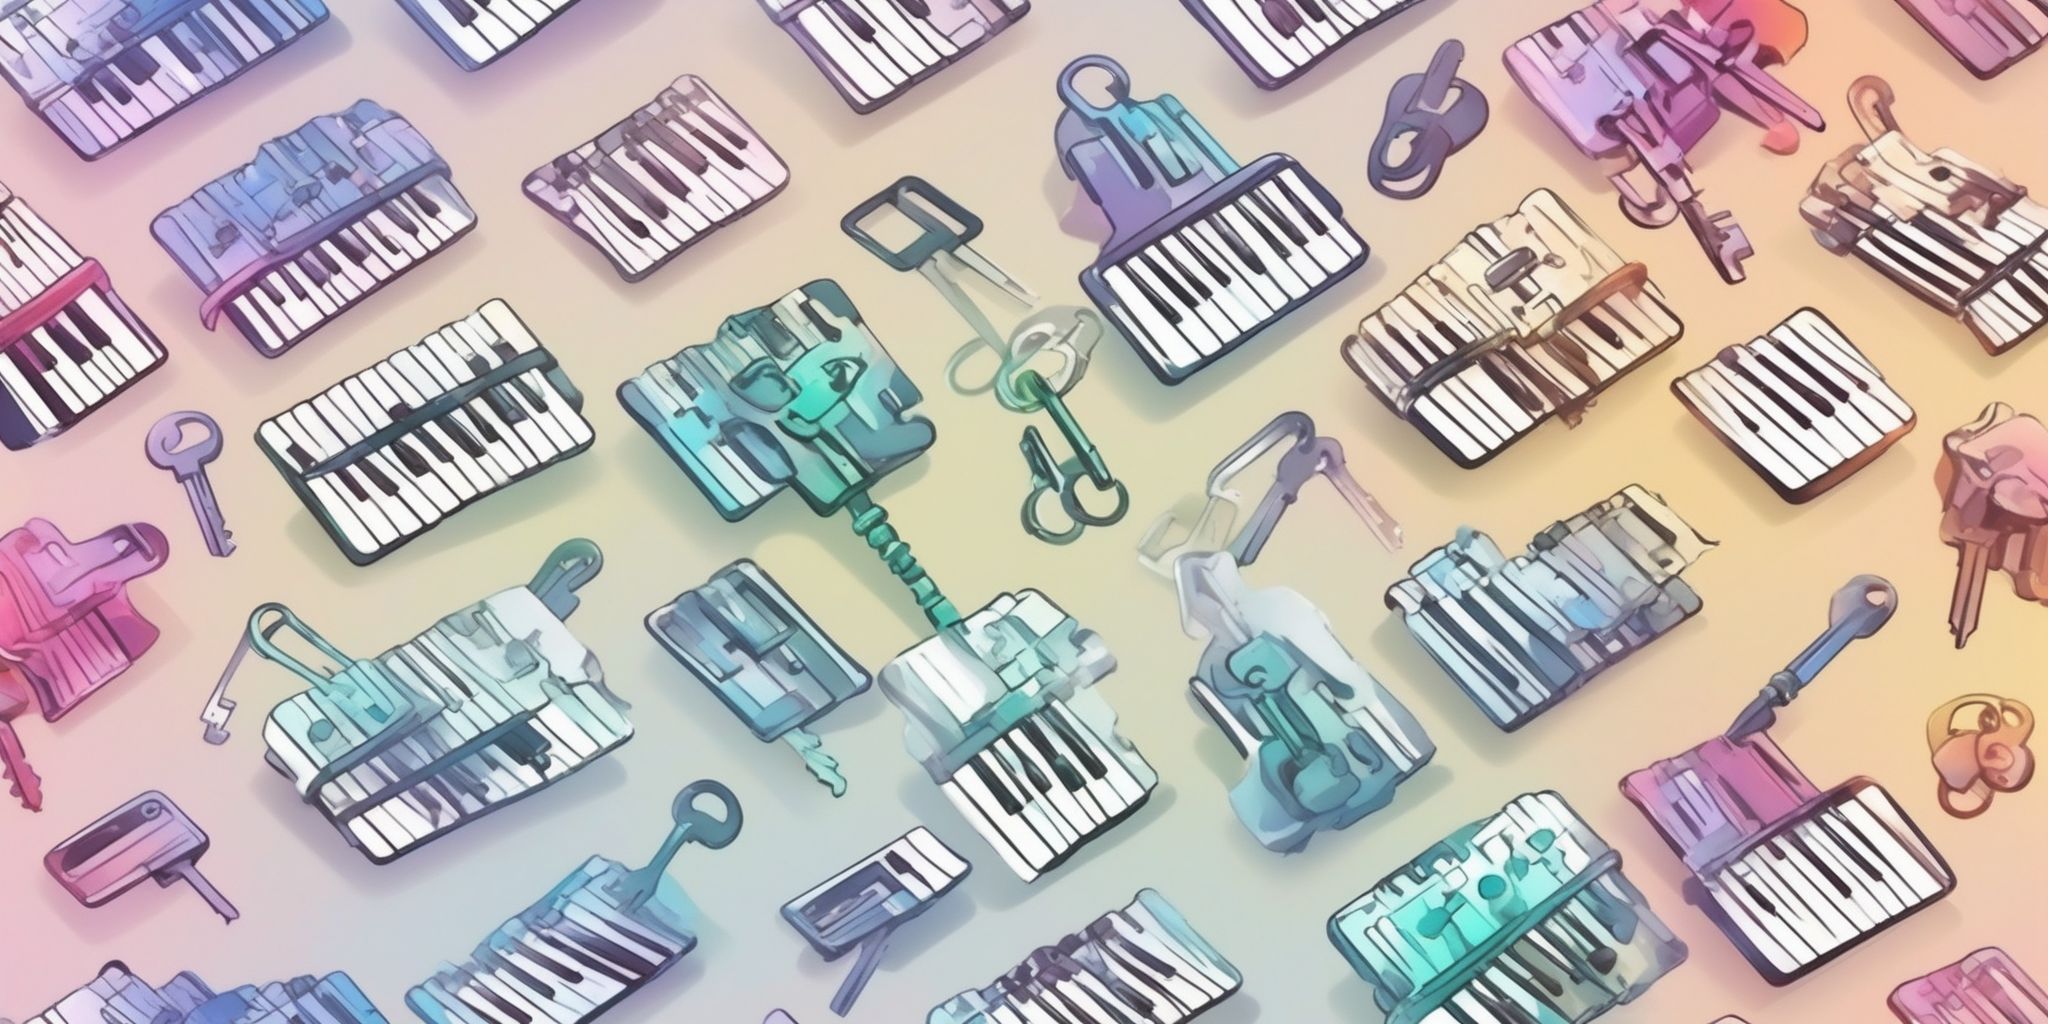 Keys on a keyboard in illustration style with gradients and white background